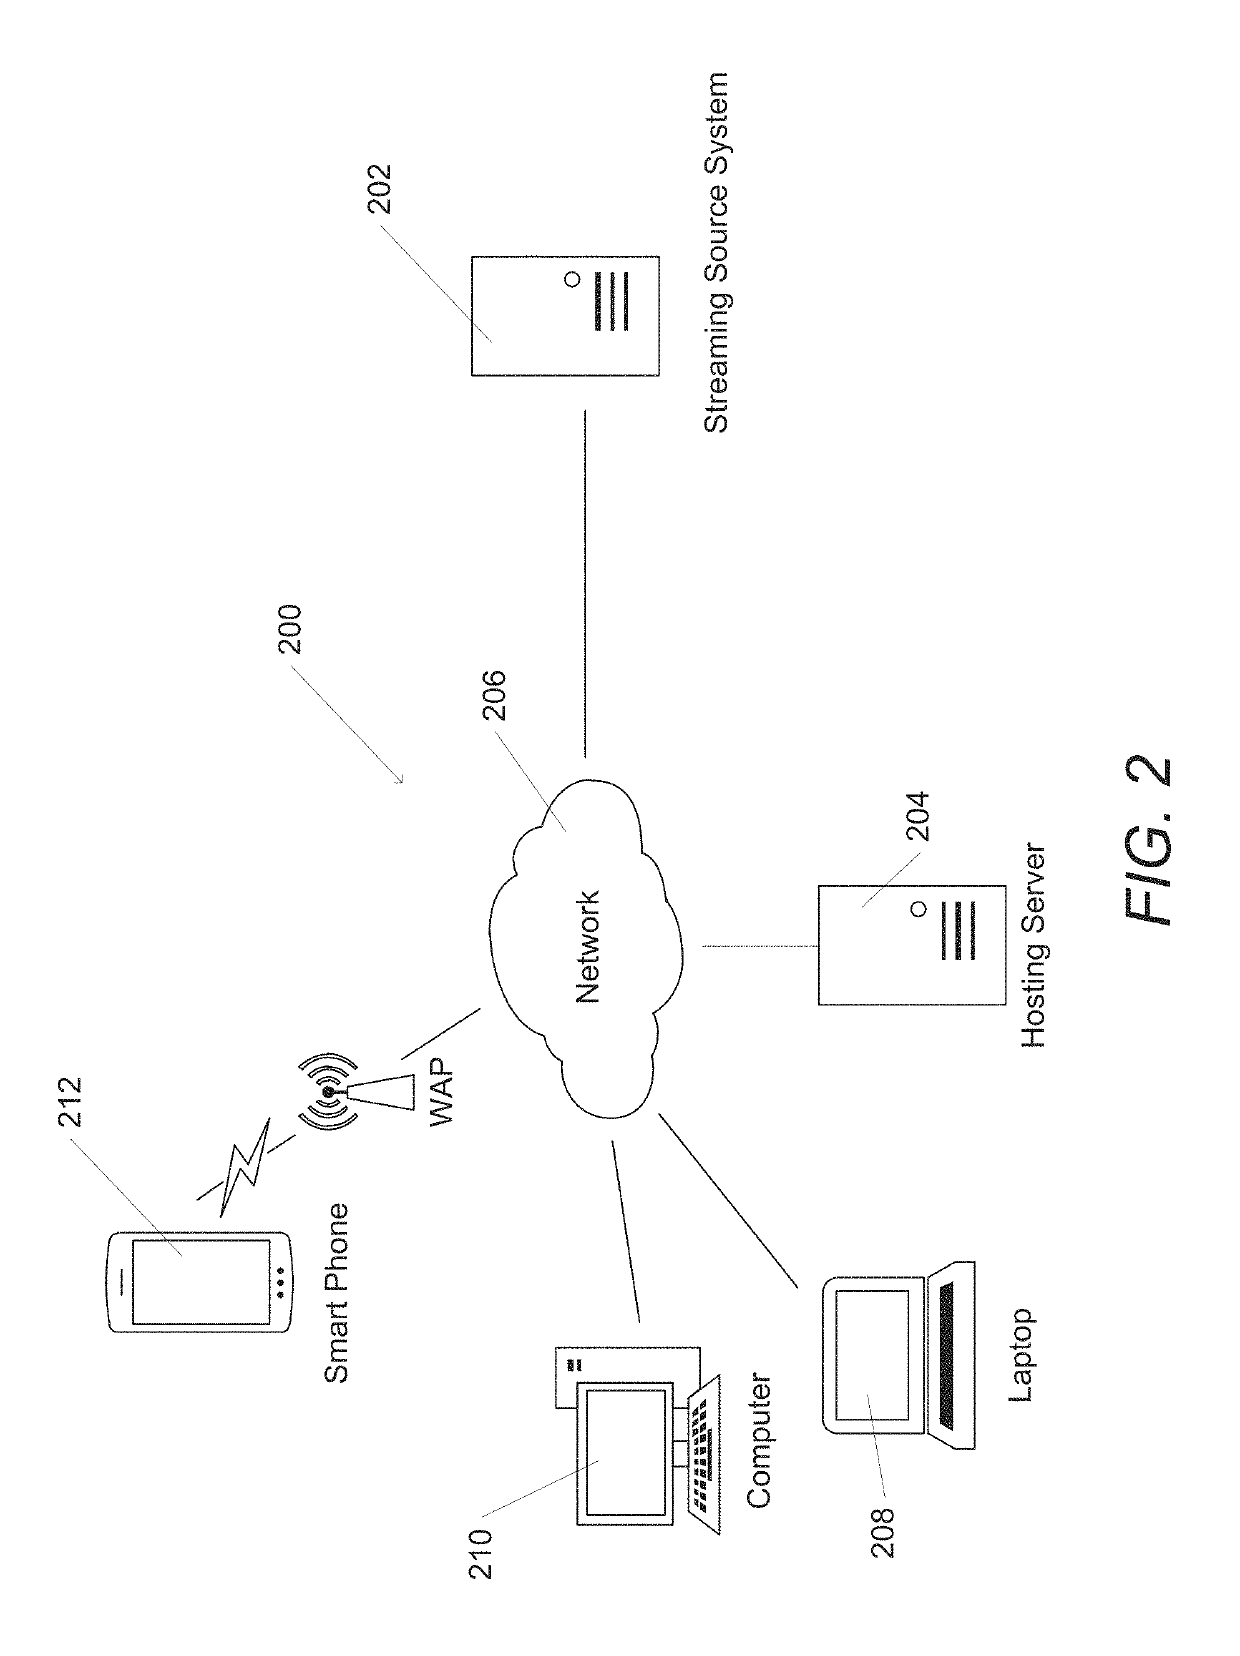 Systems and methods for streaming video games using GPU command streams